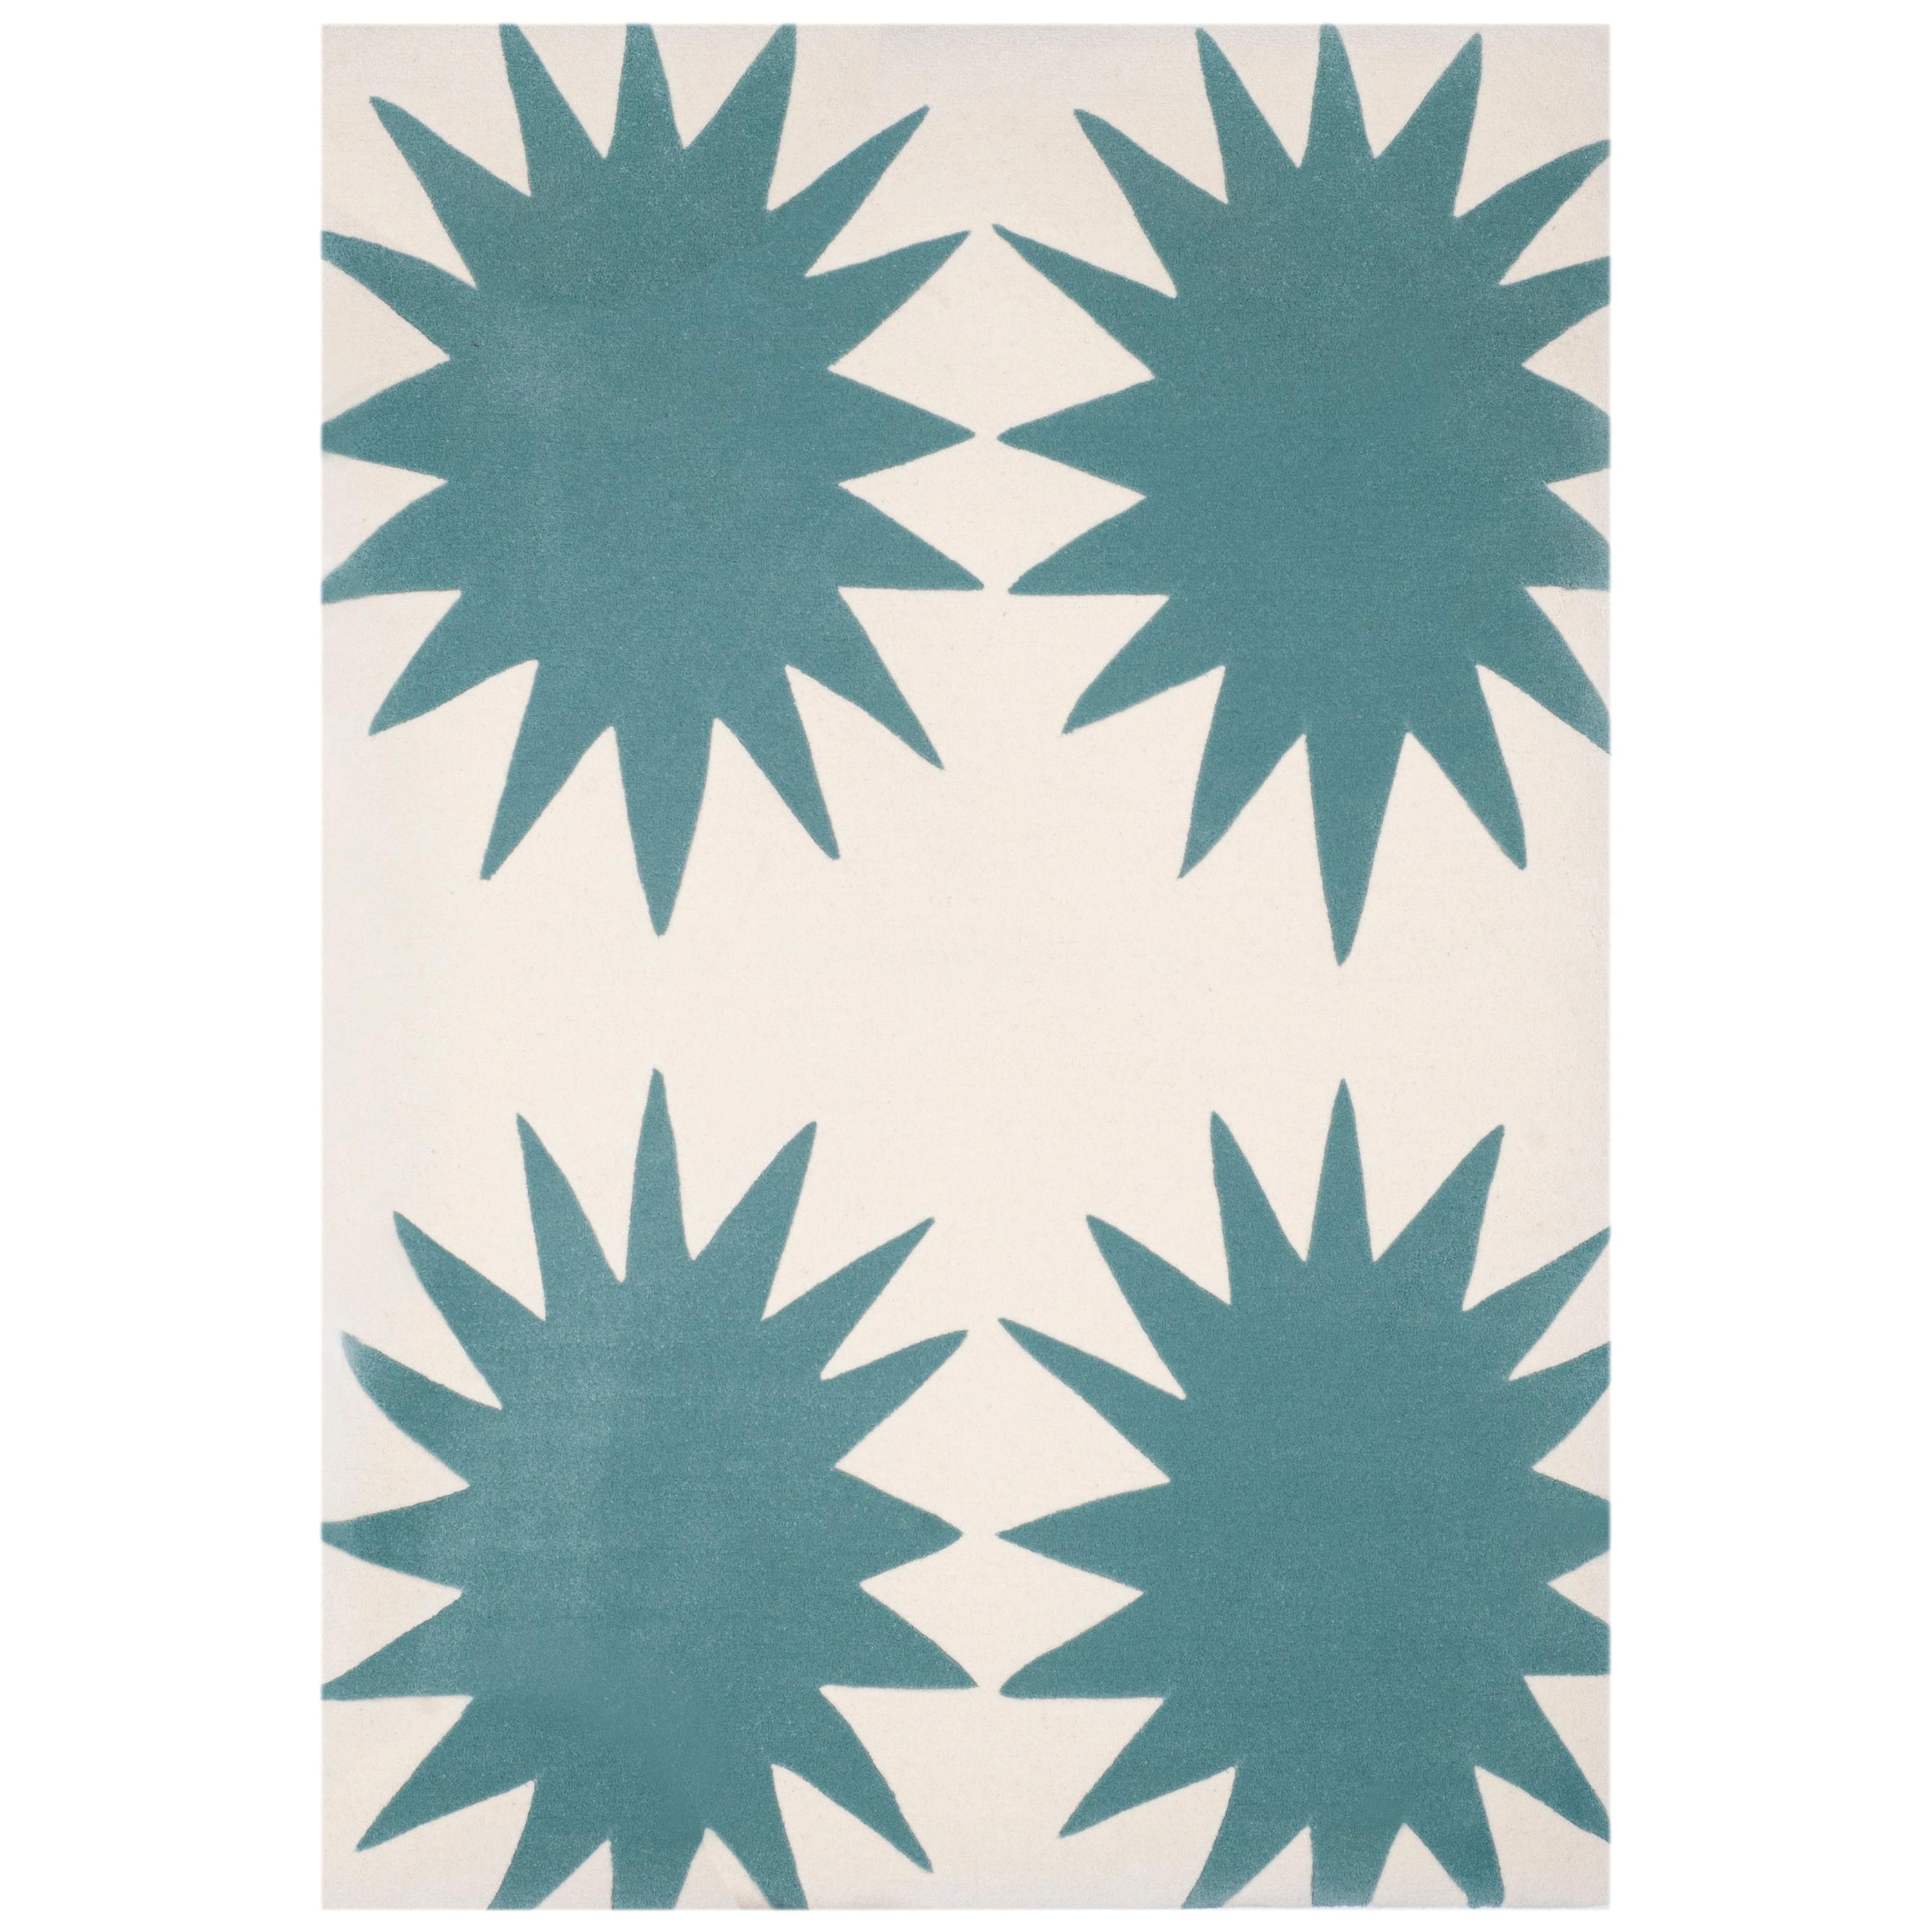 Modern Hand Tufted Wool Rug Made in Spain Turquoise and White Stars